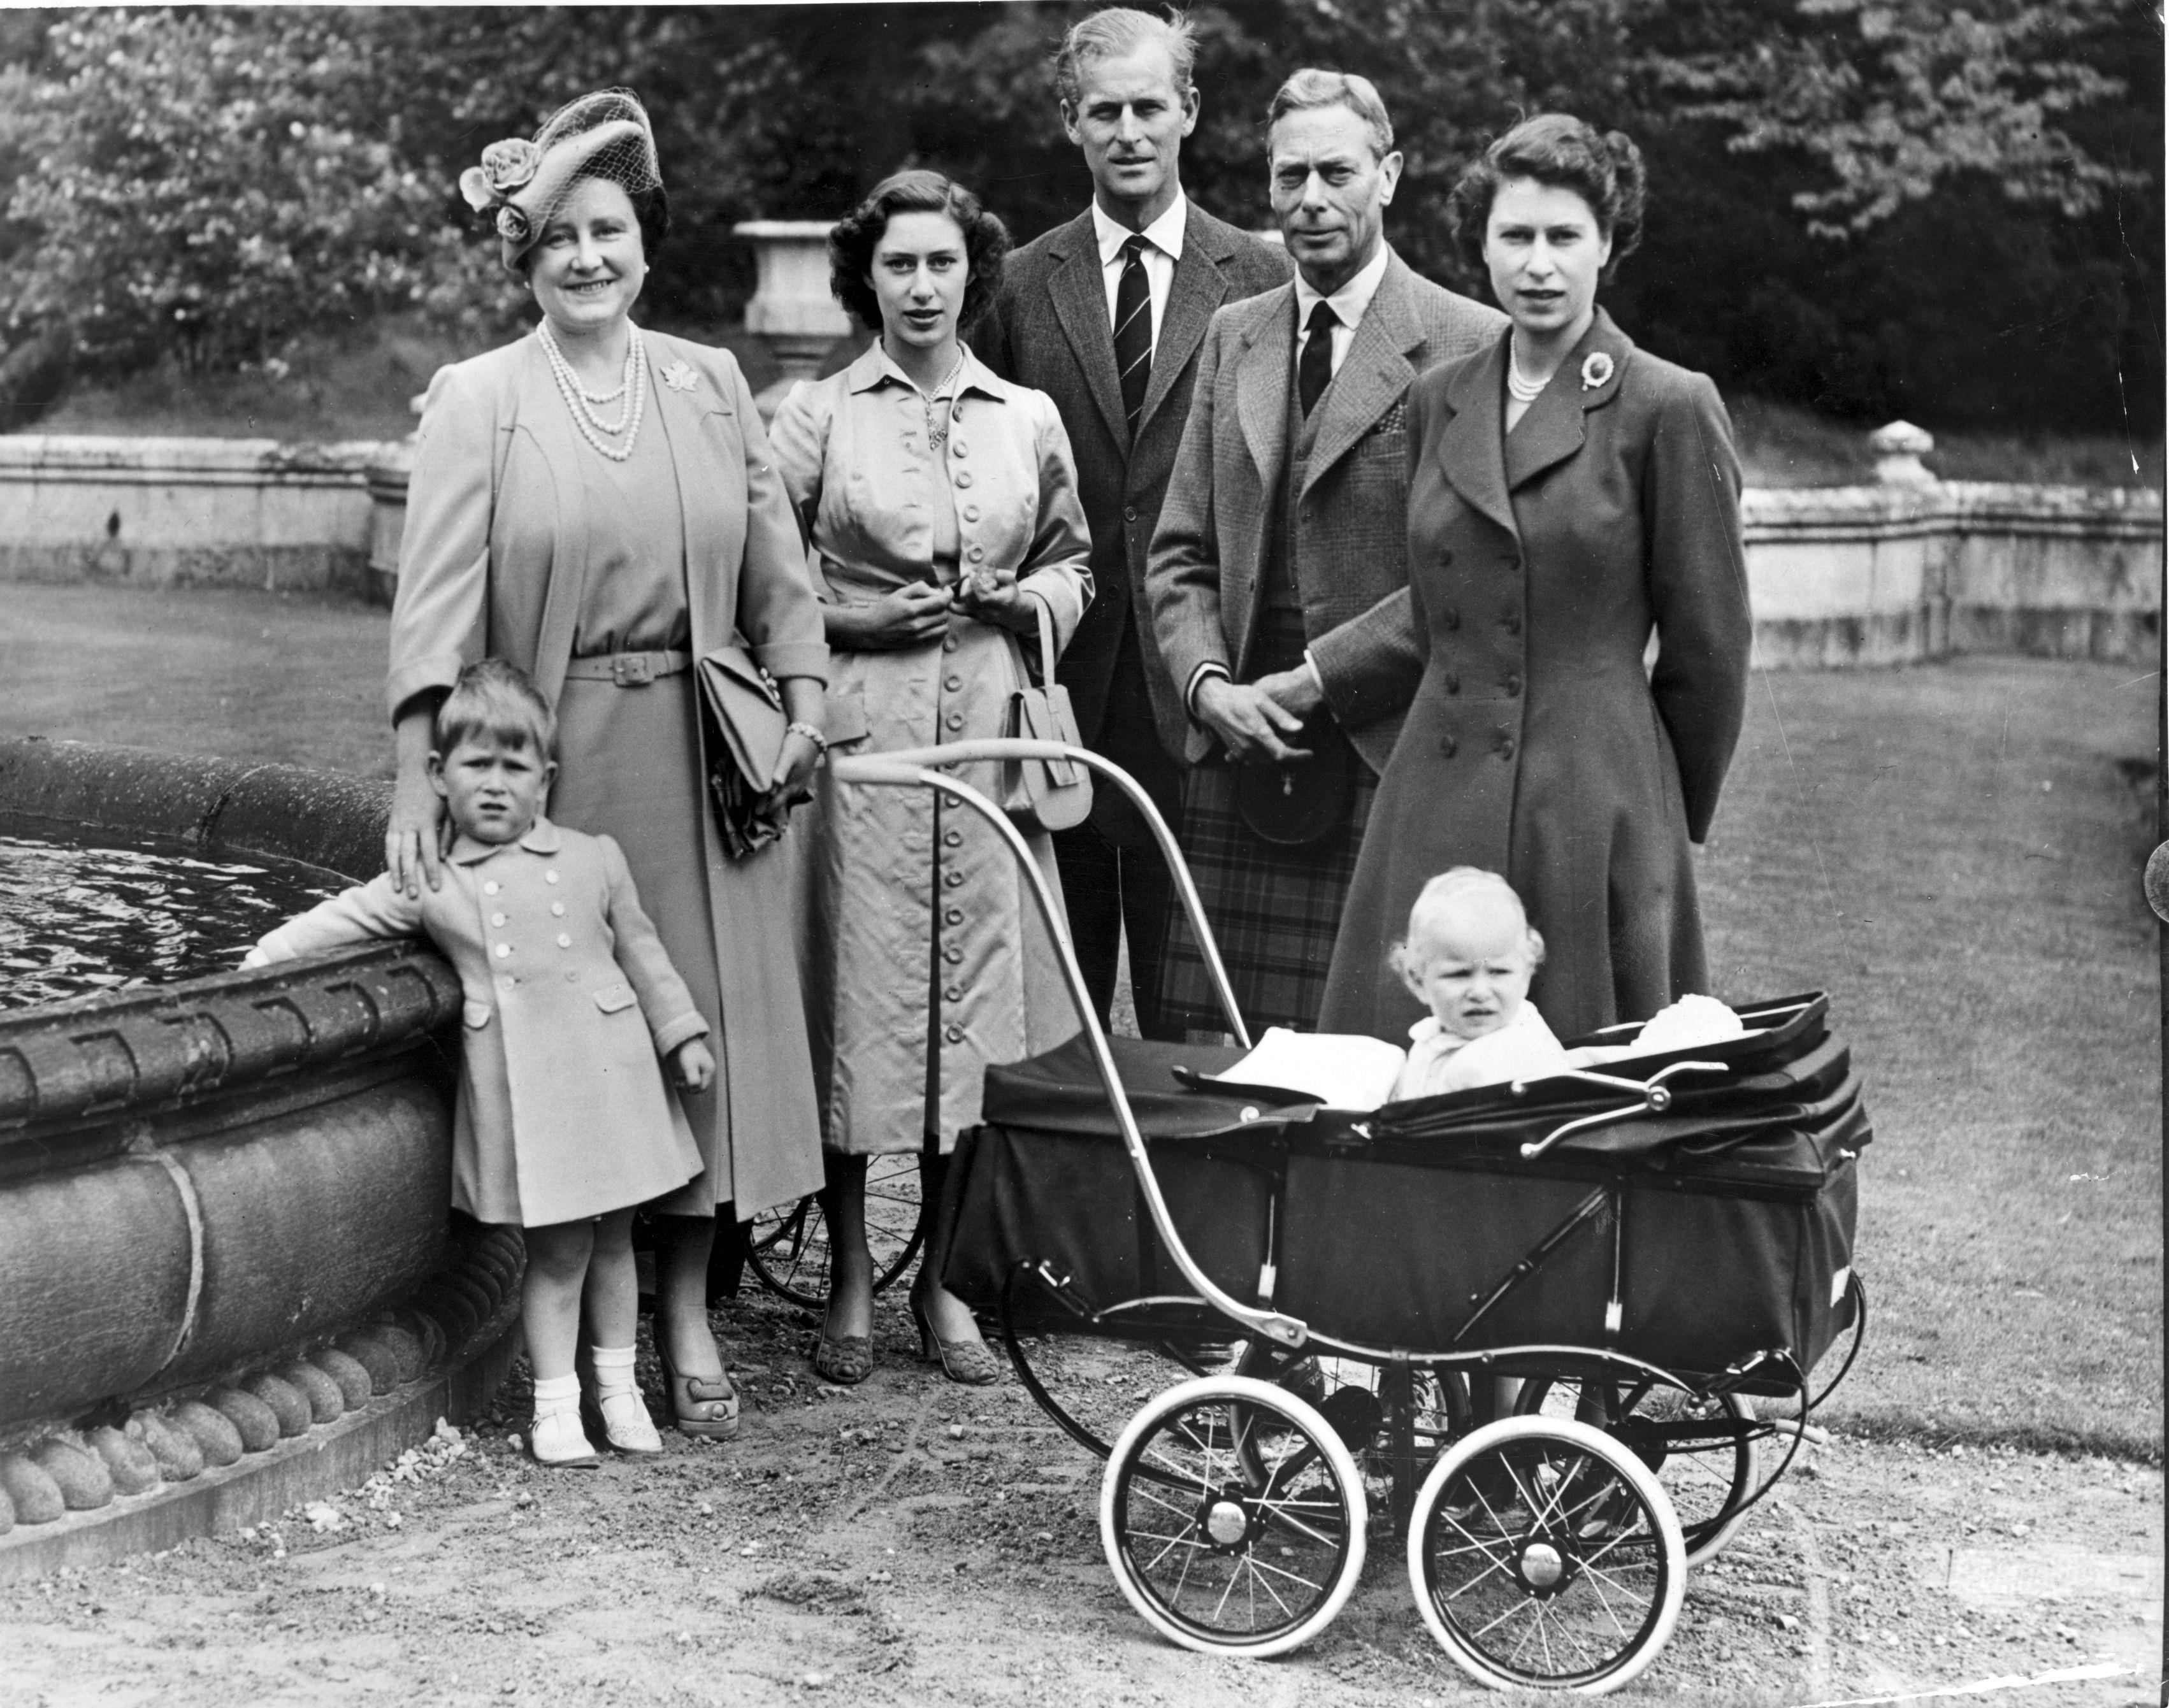 <p>Less than six months after this photo was taken on the grounds of the Balmoral Estate in Scotland, King George VI would be dead and Princess Elizabeth would be queen. The royals -- young Prince Charles, Queen Elizabeth (later the Queen Mother), Princess Margaret, Prince Philip, Duke of Edinburgh, King George VI and Princess Elizabeth with baby Princess Anne -- all posed together for one of their last family portraits with the king on Aug. 22, 1951.</p>